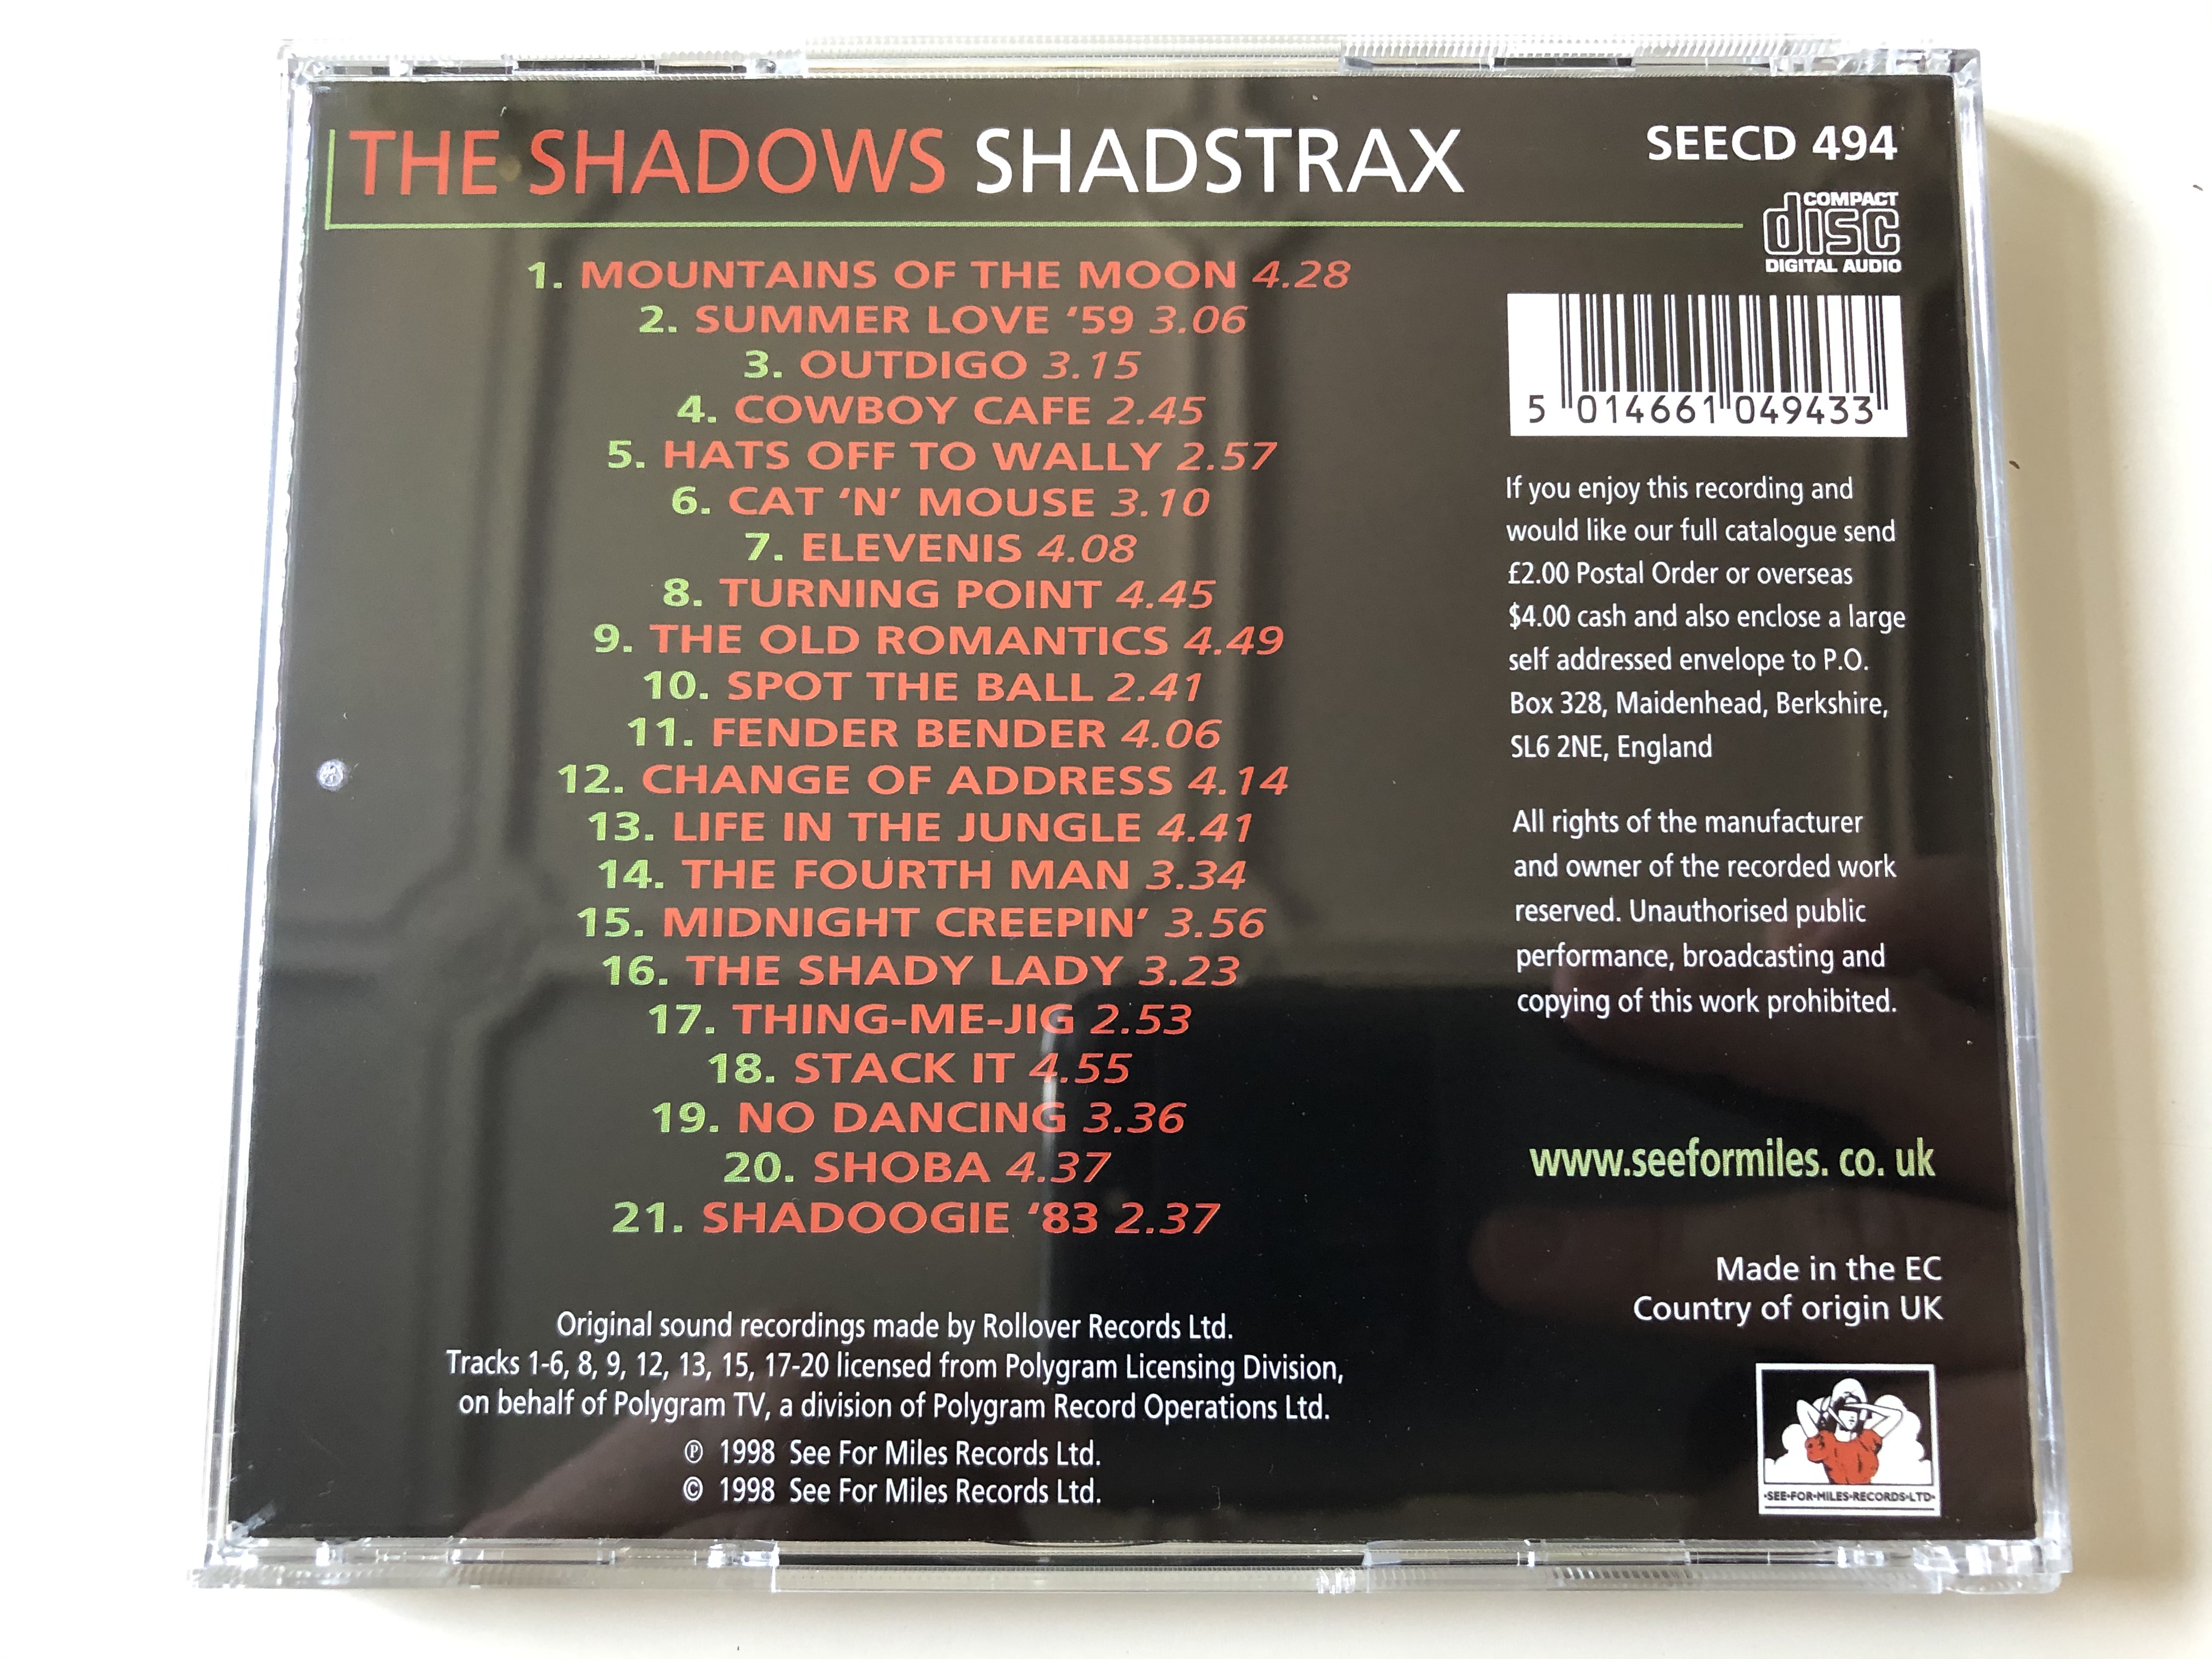 the-shadows-shadstrax-see-for-miles-records-ltd.-audio-cd-1998-seecd-494-10-.jpg